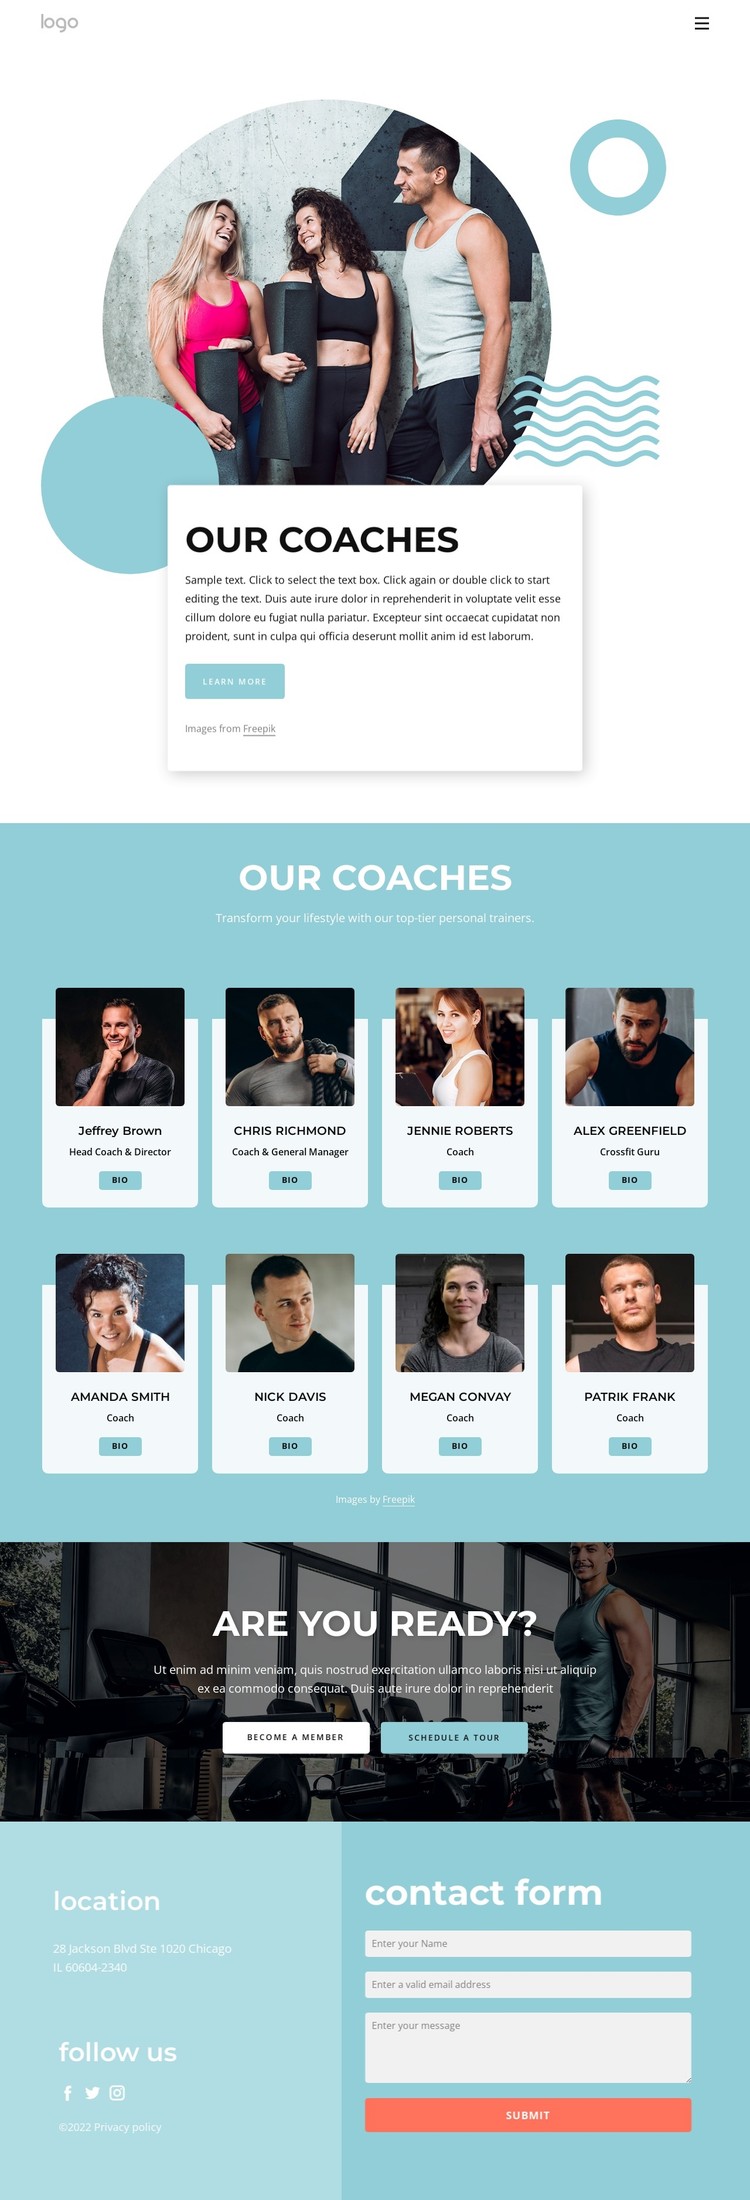 Our Coaches Static Site Generator